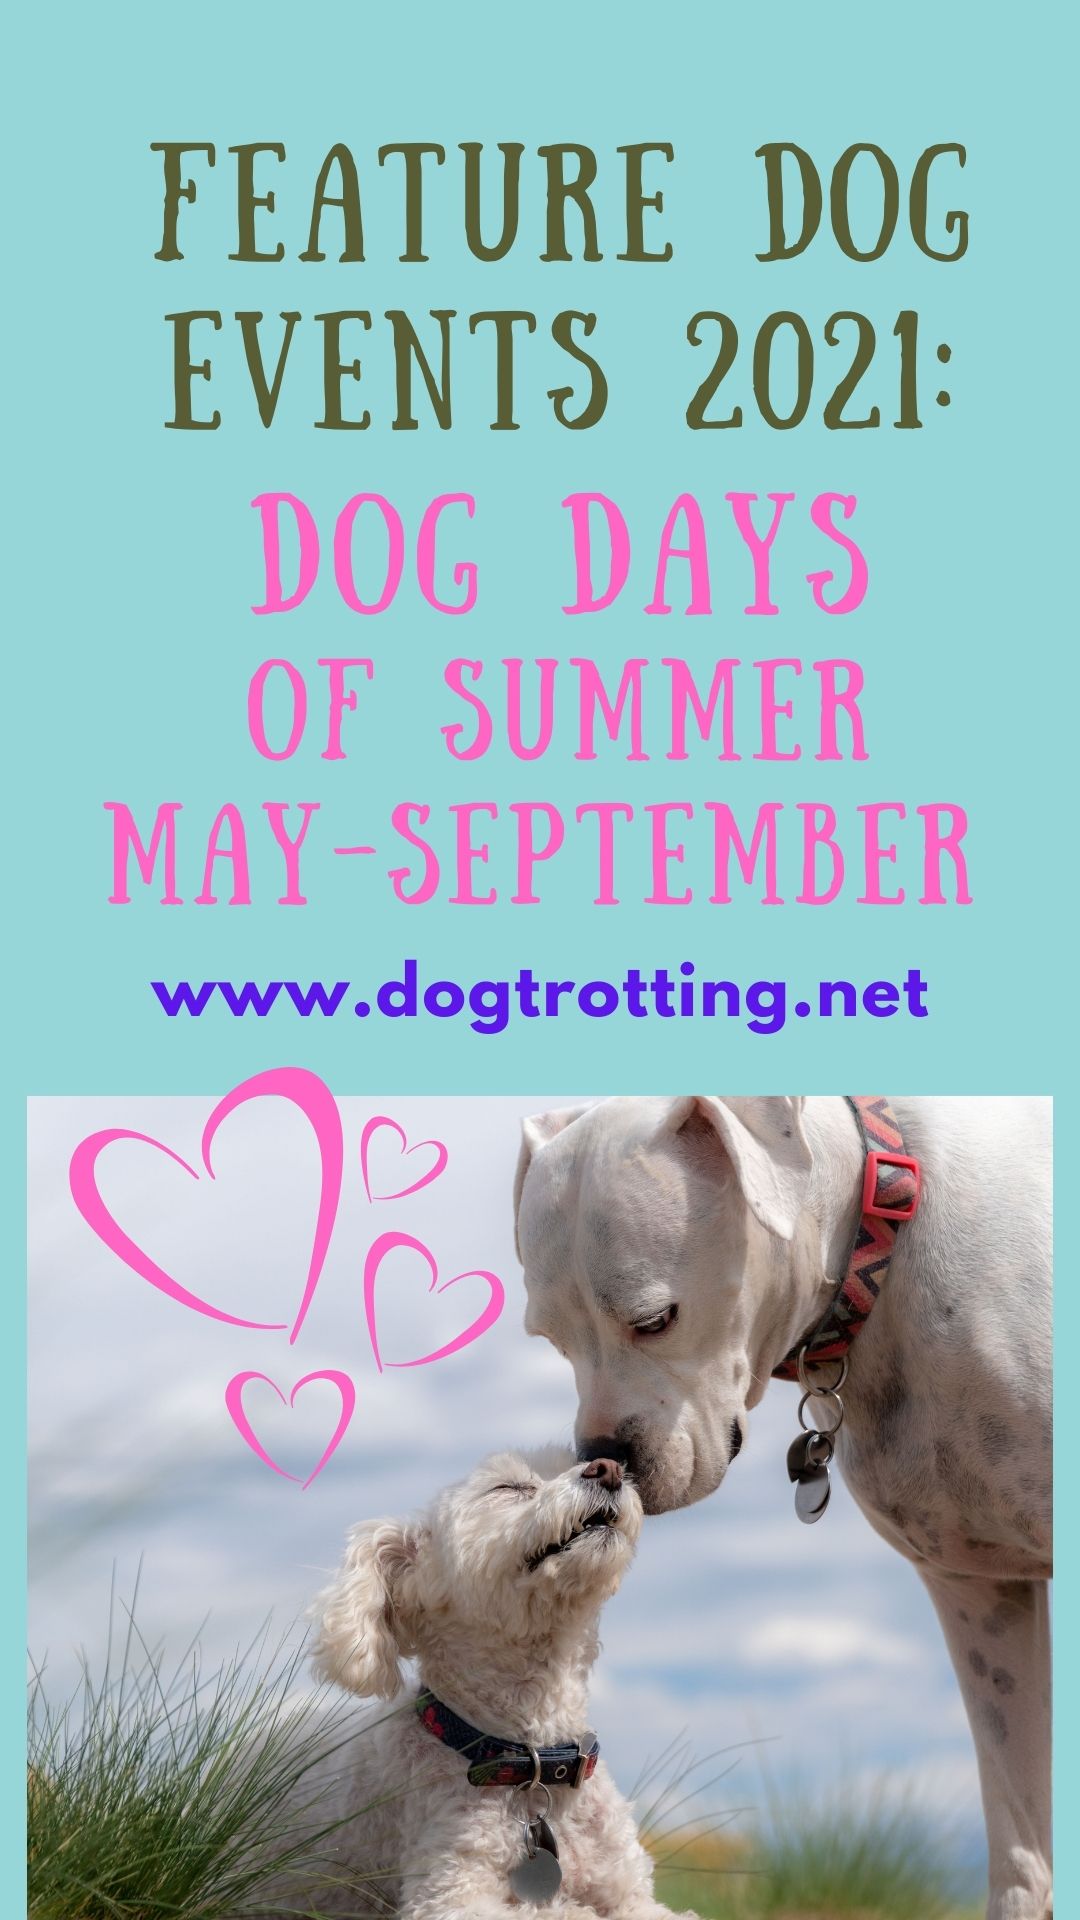 dog days of summer promo poster with two white dogs dogtrotting.net